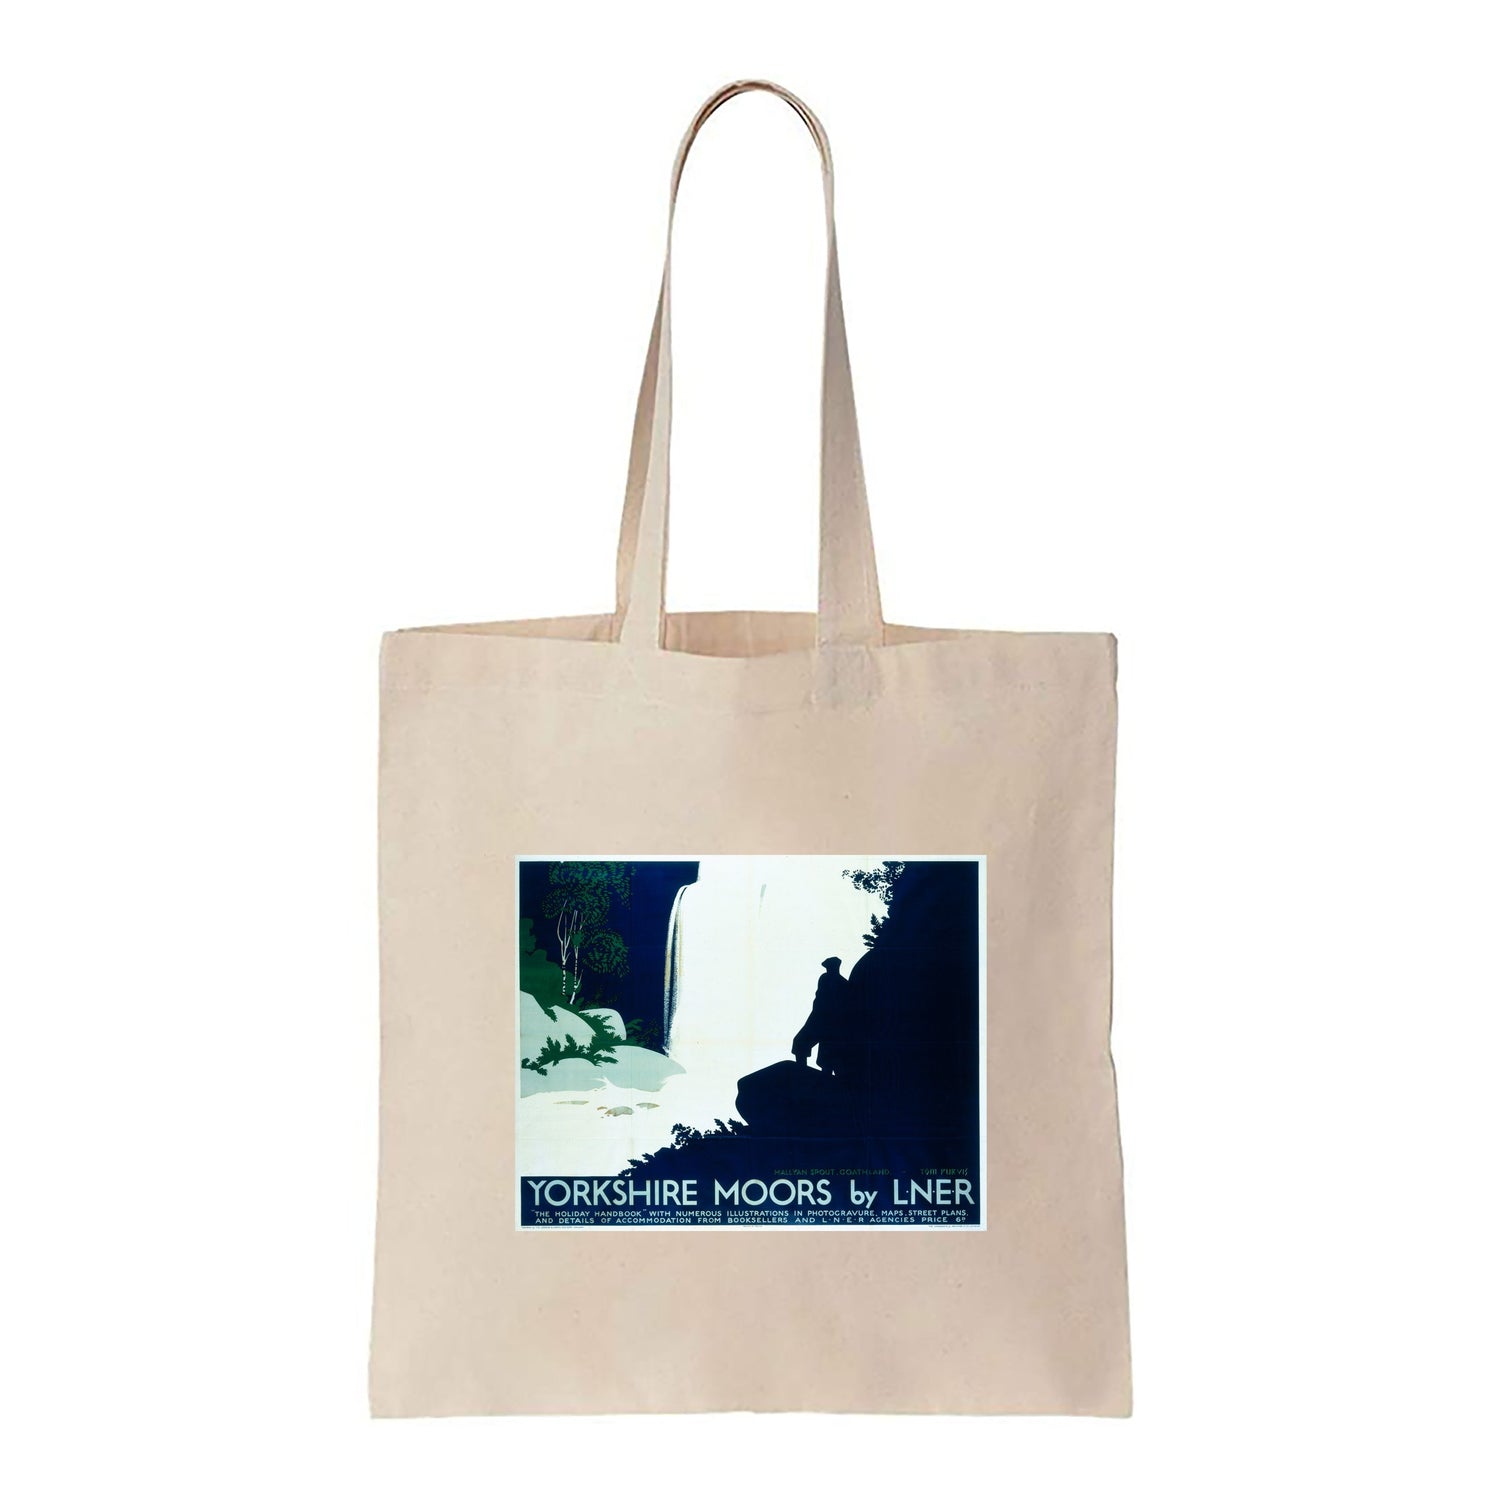 Yorkshire Moors by LNER - Canvas Tote Bag